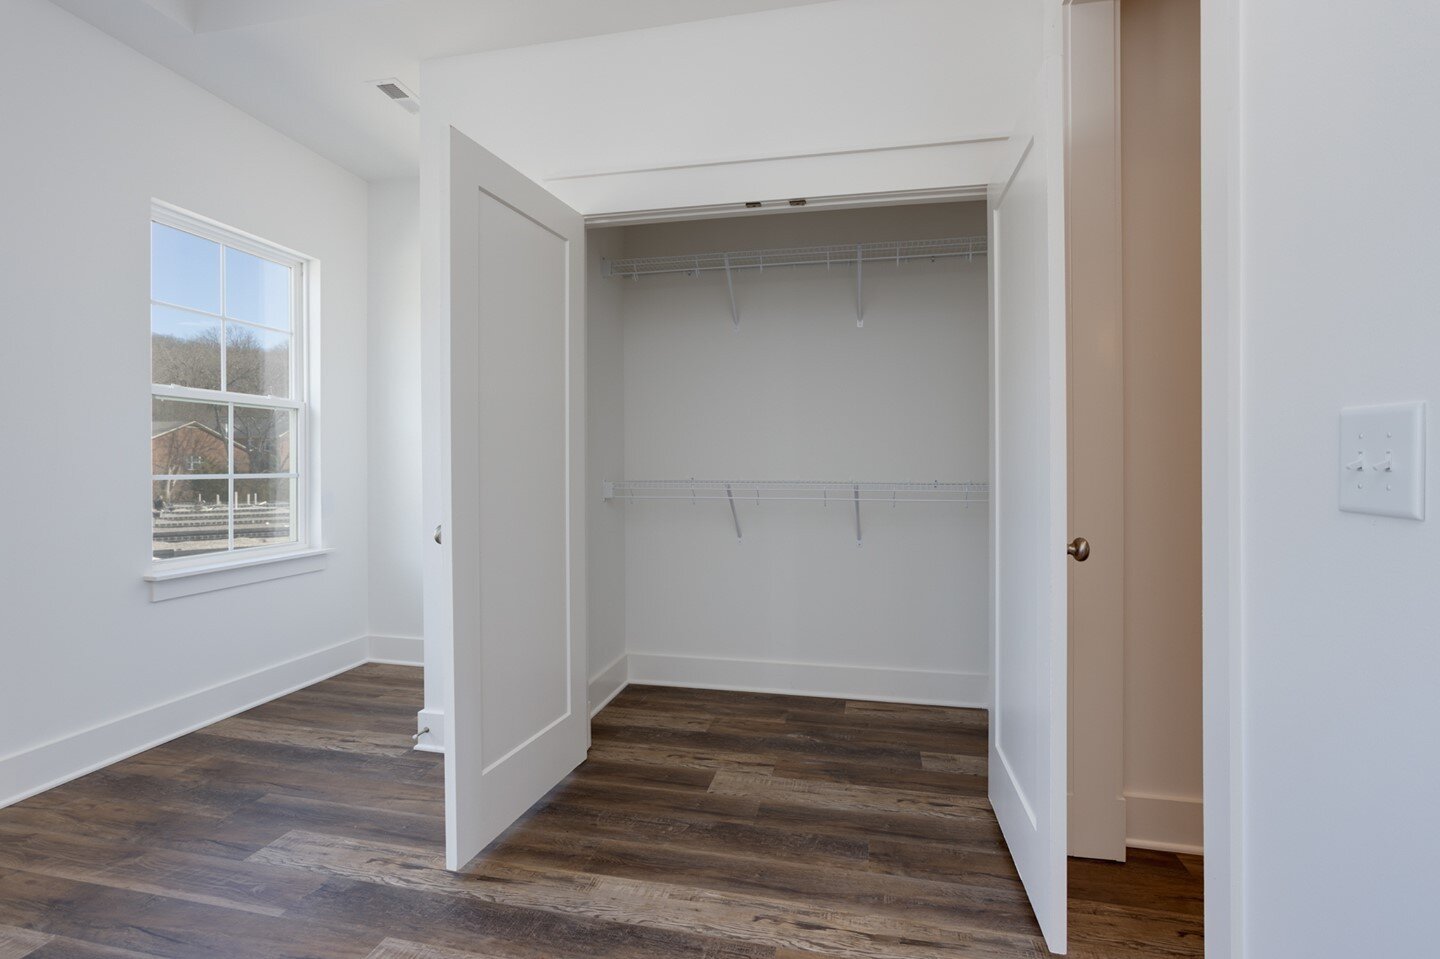 Never deal with a storage shortage again! Our spacious townhomes at Belle Meade Ridge have enough storage for everything you own, with room to grow! 

#bellemeade #bellevue #bellemeadetn #bellevuerealestate #bellevuetn #townhome #townhouse #nashville